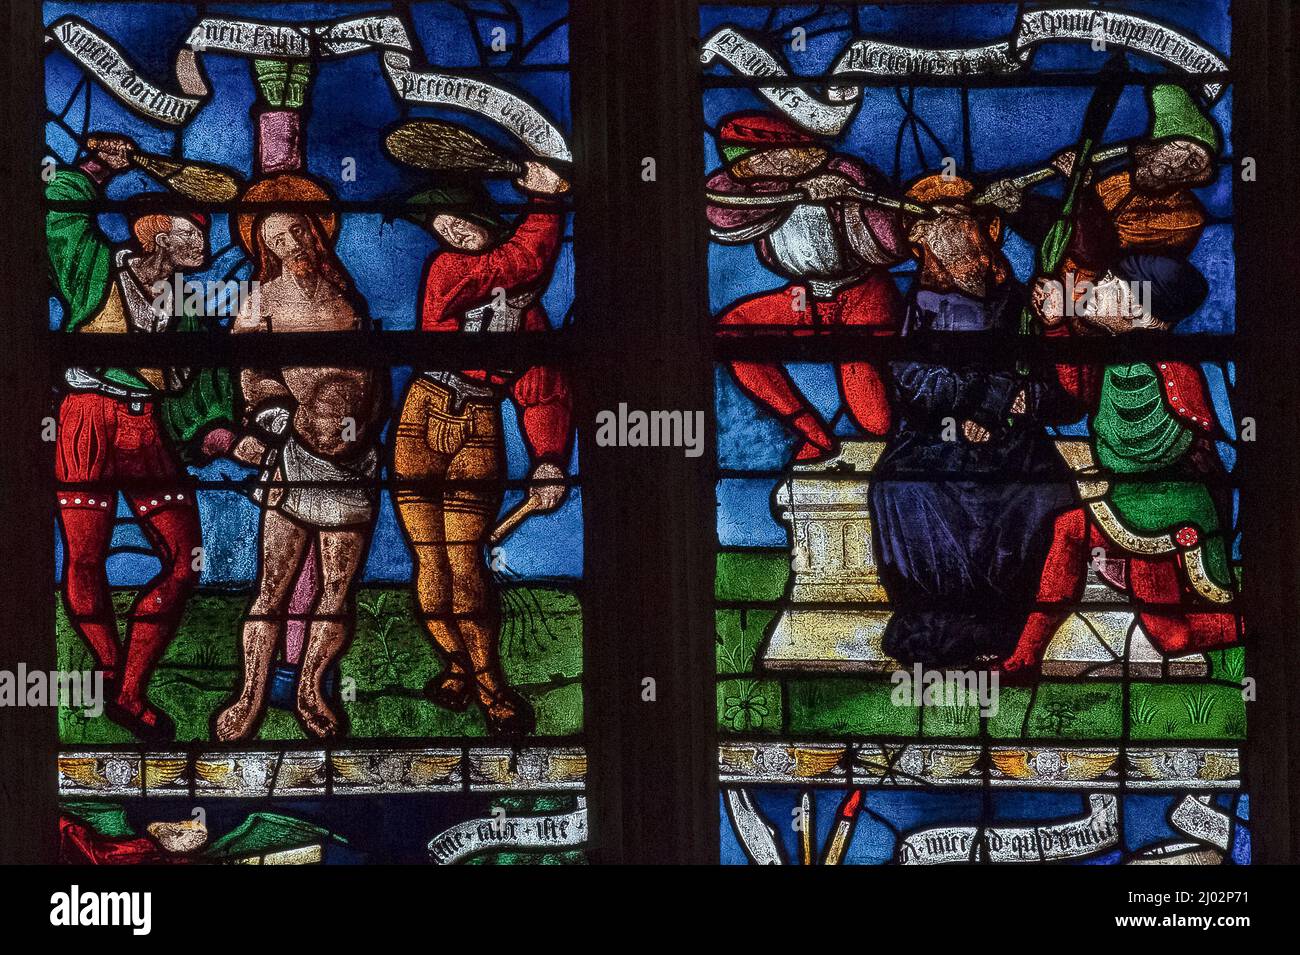 The Flagellation and the Crowning with Thorns: two vivid stained glass panels depicting scenes from the Passion of Christ in a window of 1511, created by the master glassmakers of Troyes, in the Église Saint-Rémi at Ceffonds, a village in the Haute-Marne department of the Champagne region in northeast France. Stock Photo